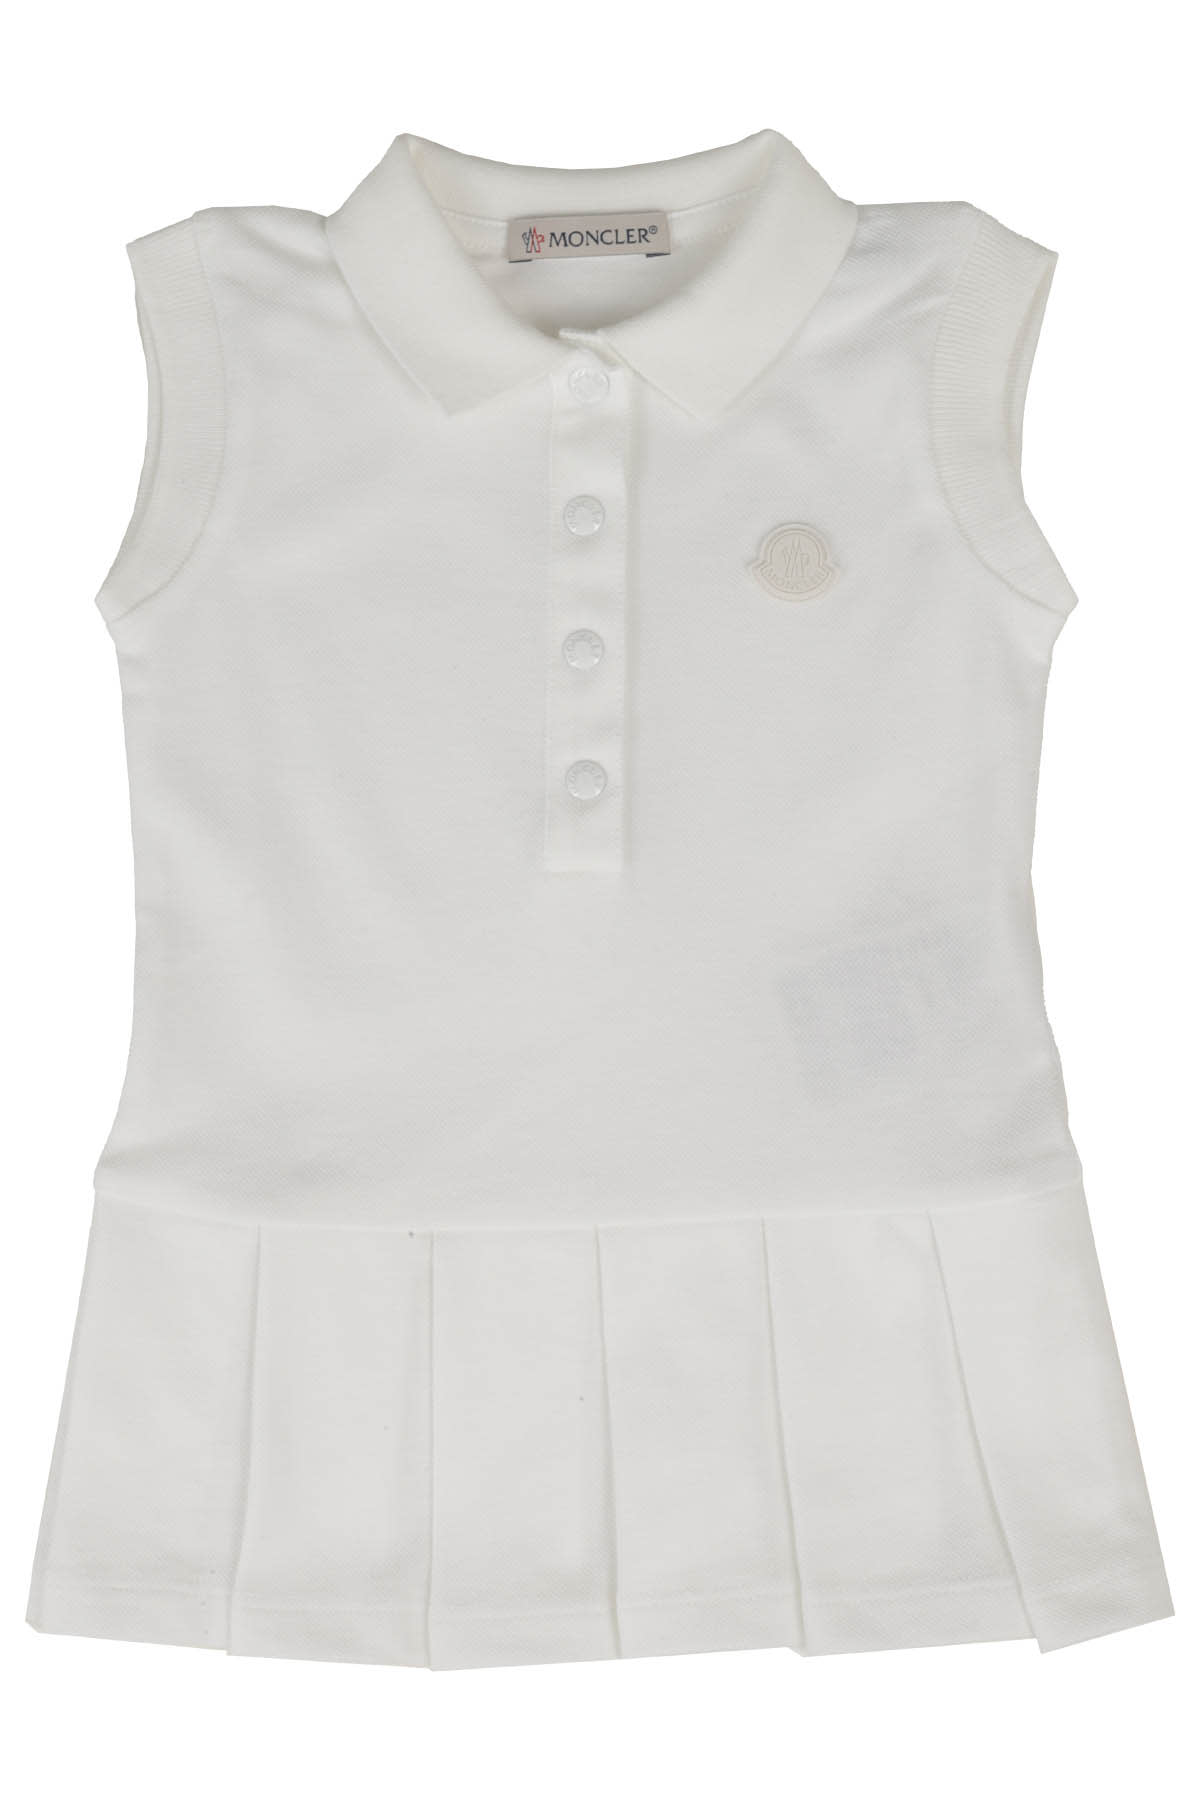 Moncler Babies' Dress In Off White